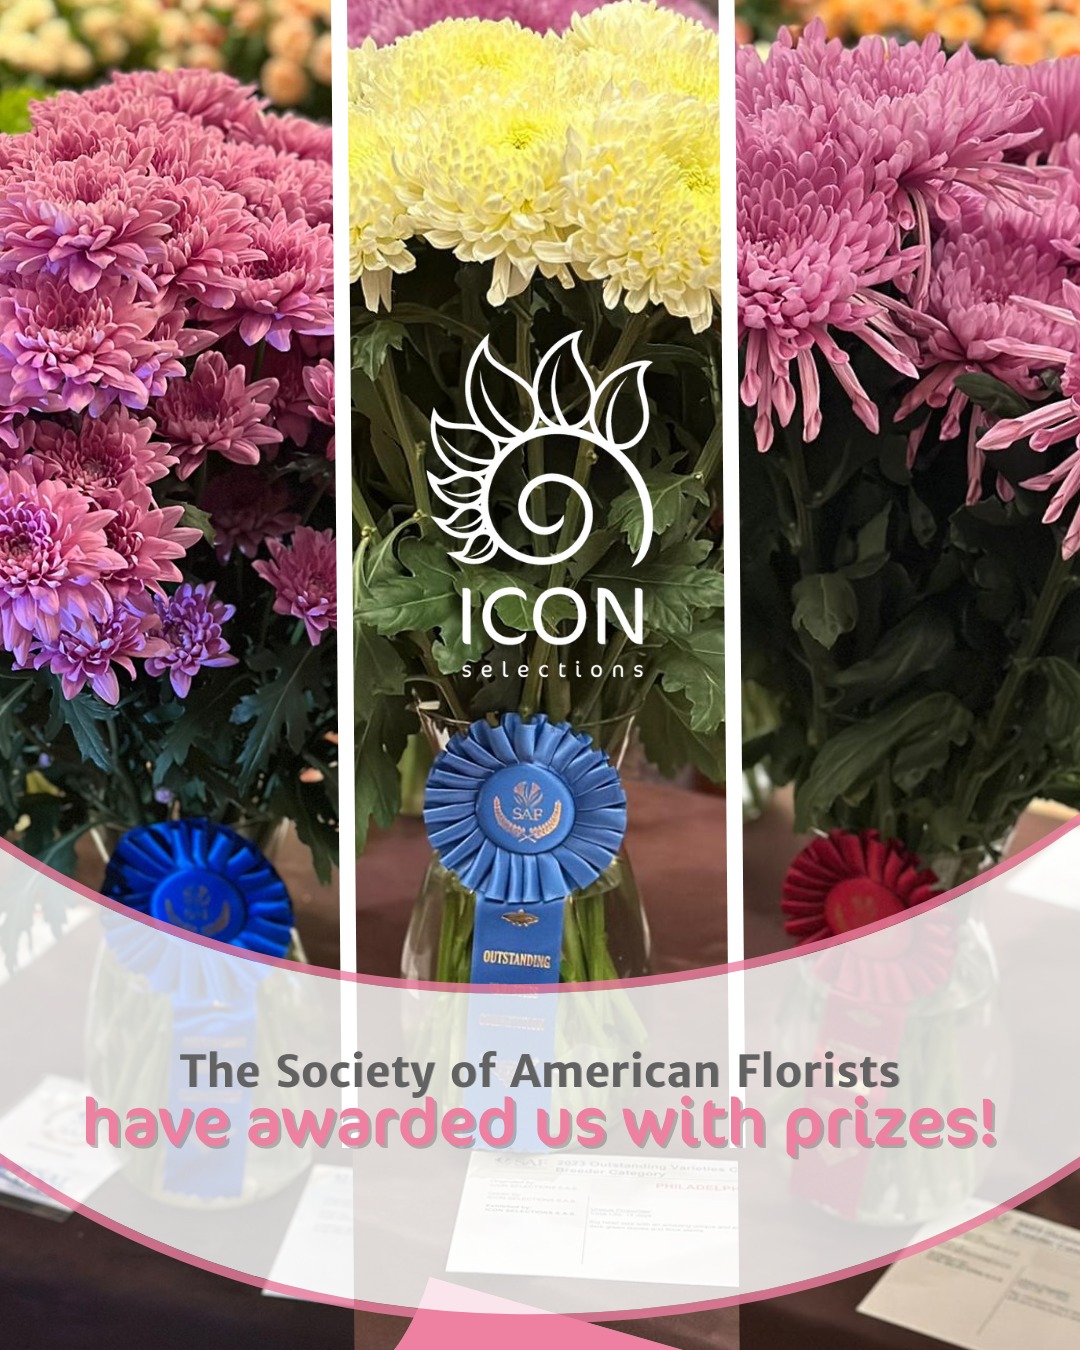 The Society of American Florists (SAF) 2023 awarder us 3 prices